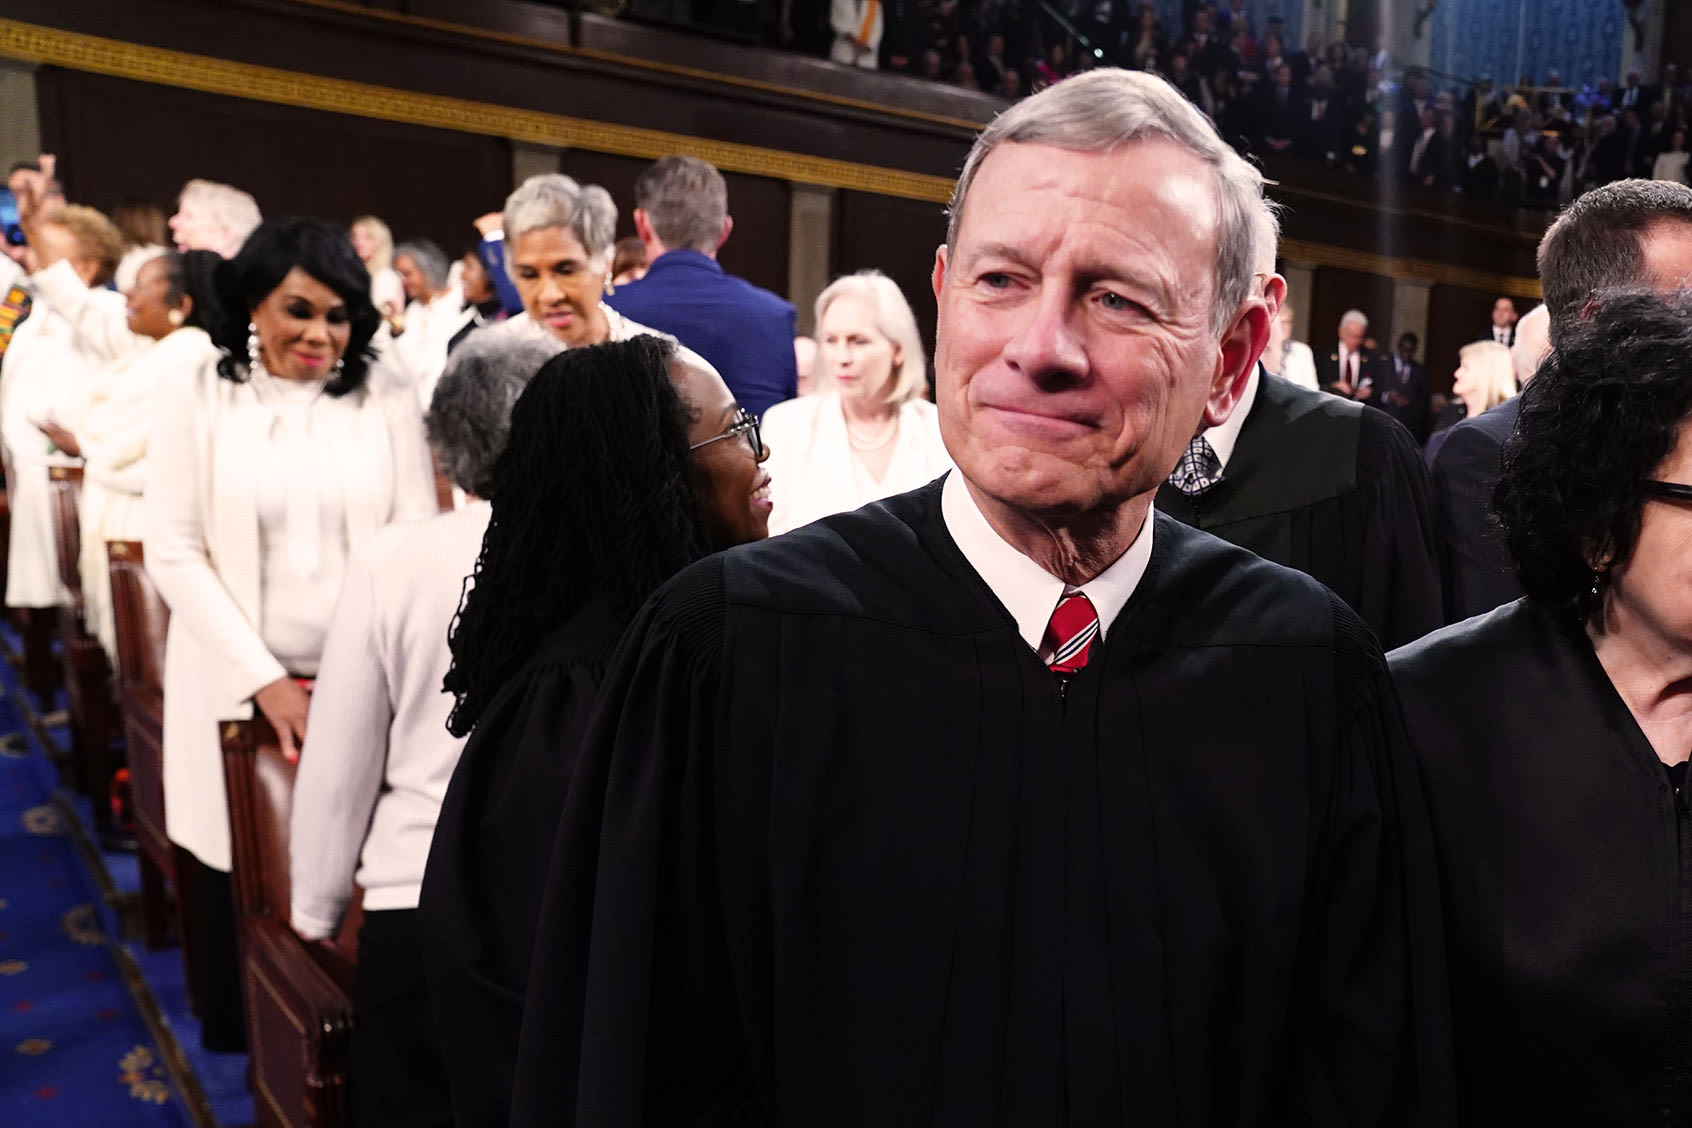 “He is alone”: Experts say "extreme" ruling shows John Roberts has "lost his authority" over SCOTUS